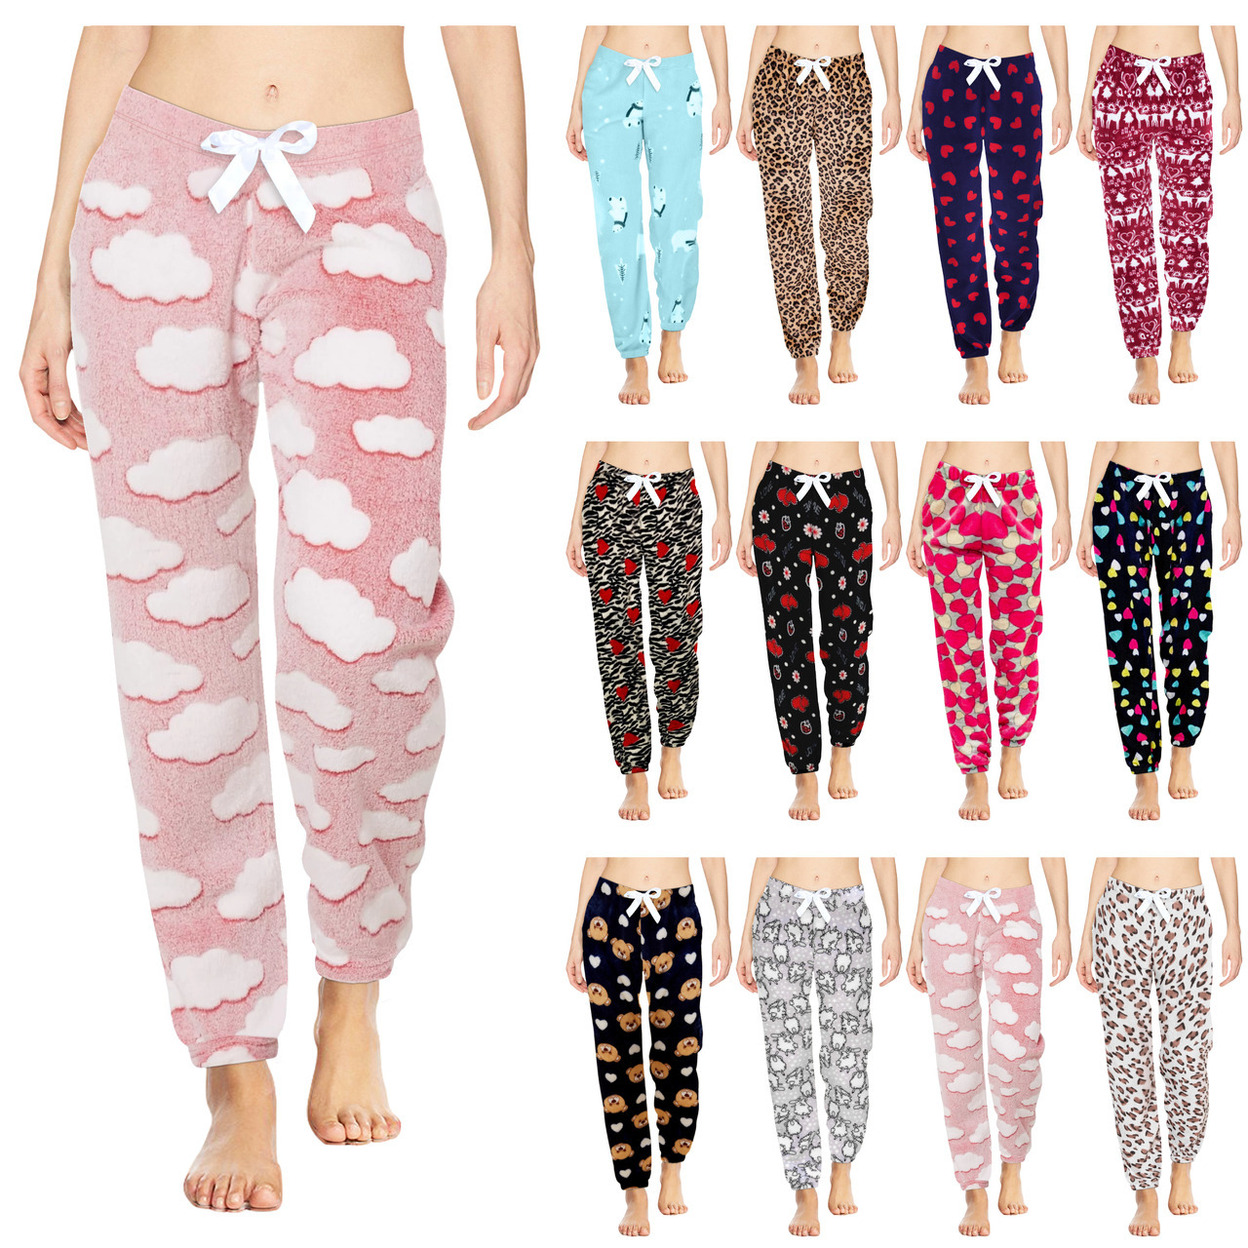 Multi-Pack: Women's Printed Ultra-Soft Comfy Stretch Micro-Fleece Pajama Lounge Pants - 1-pack, Animal, Small